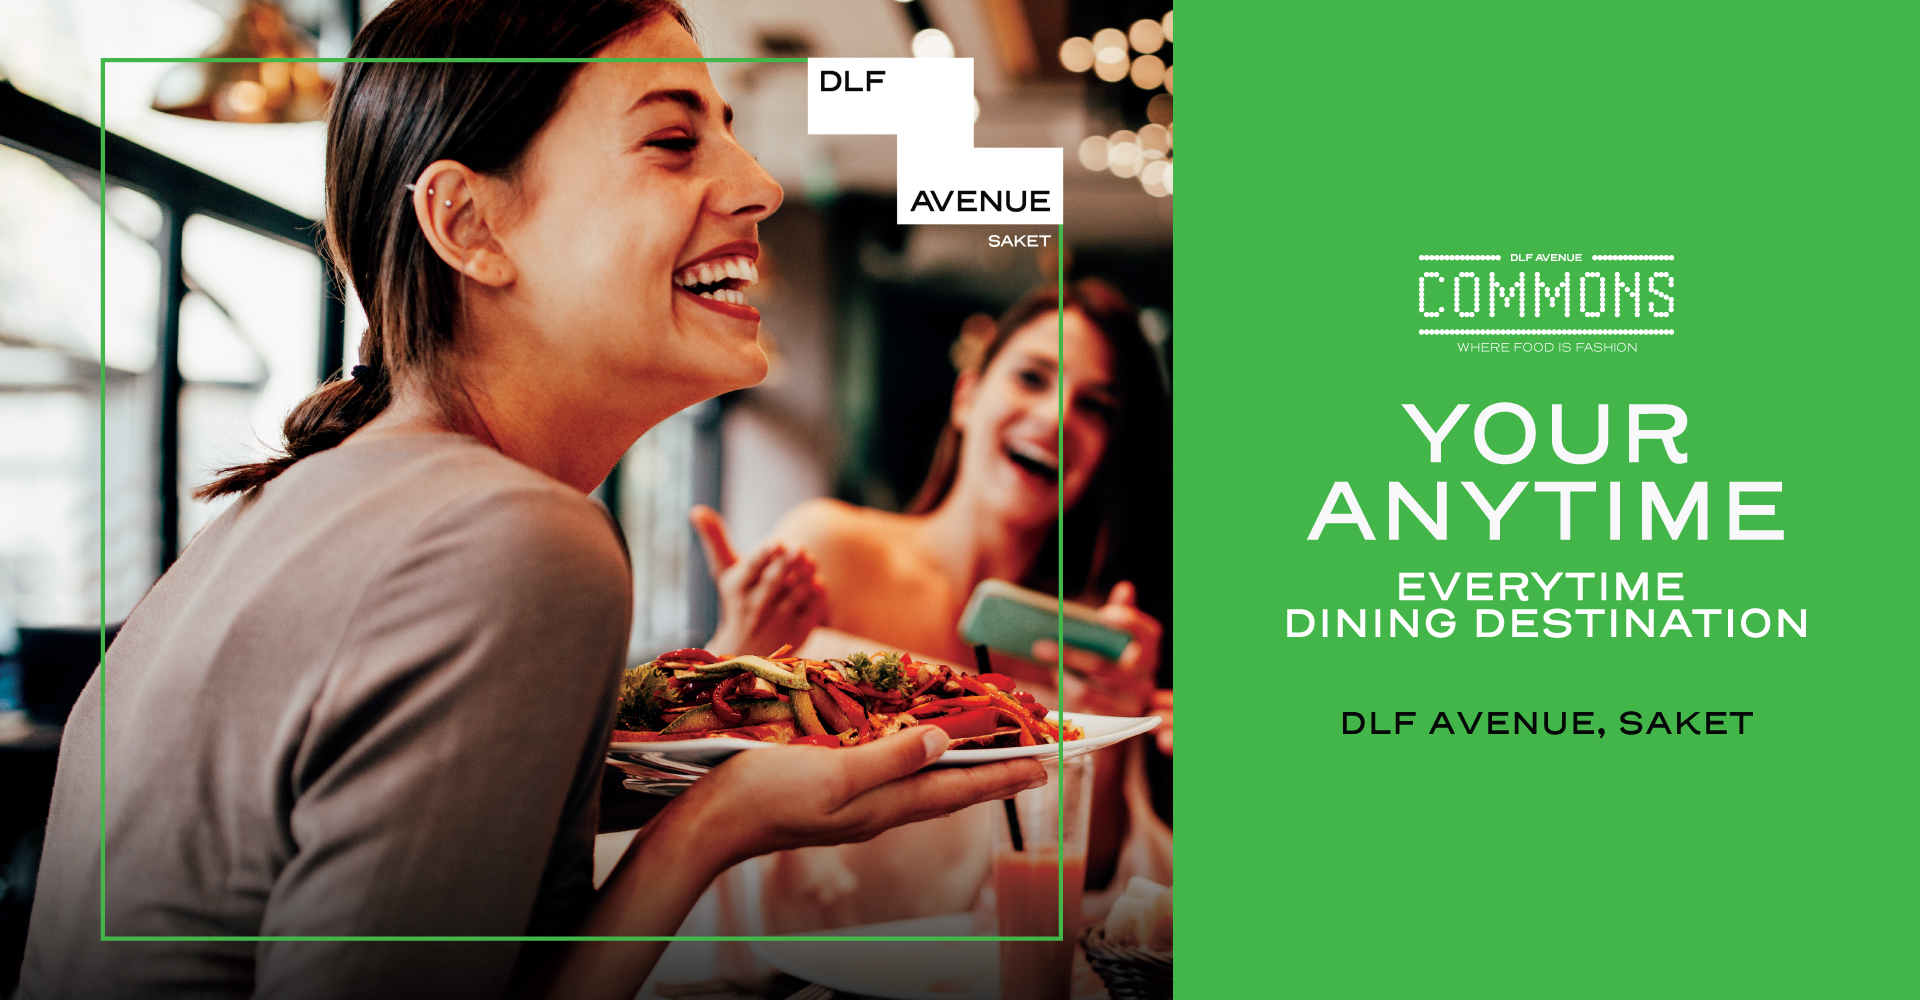 commons dine in Dlf Avenue